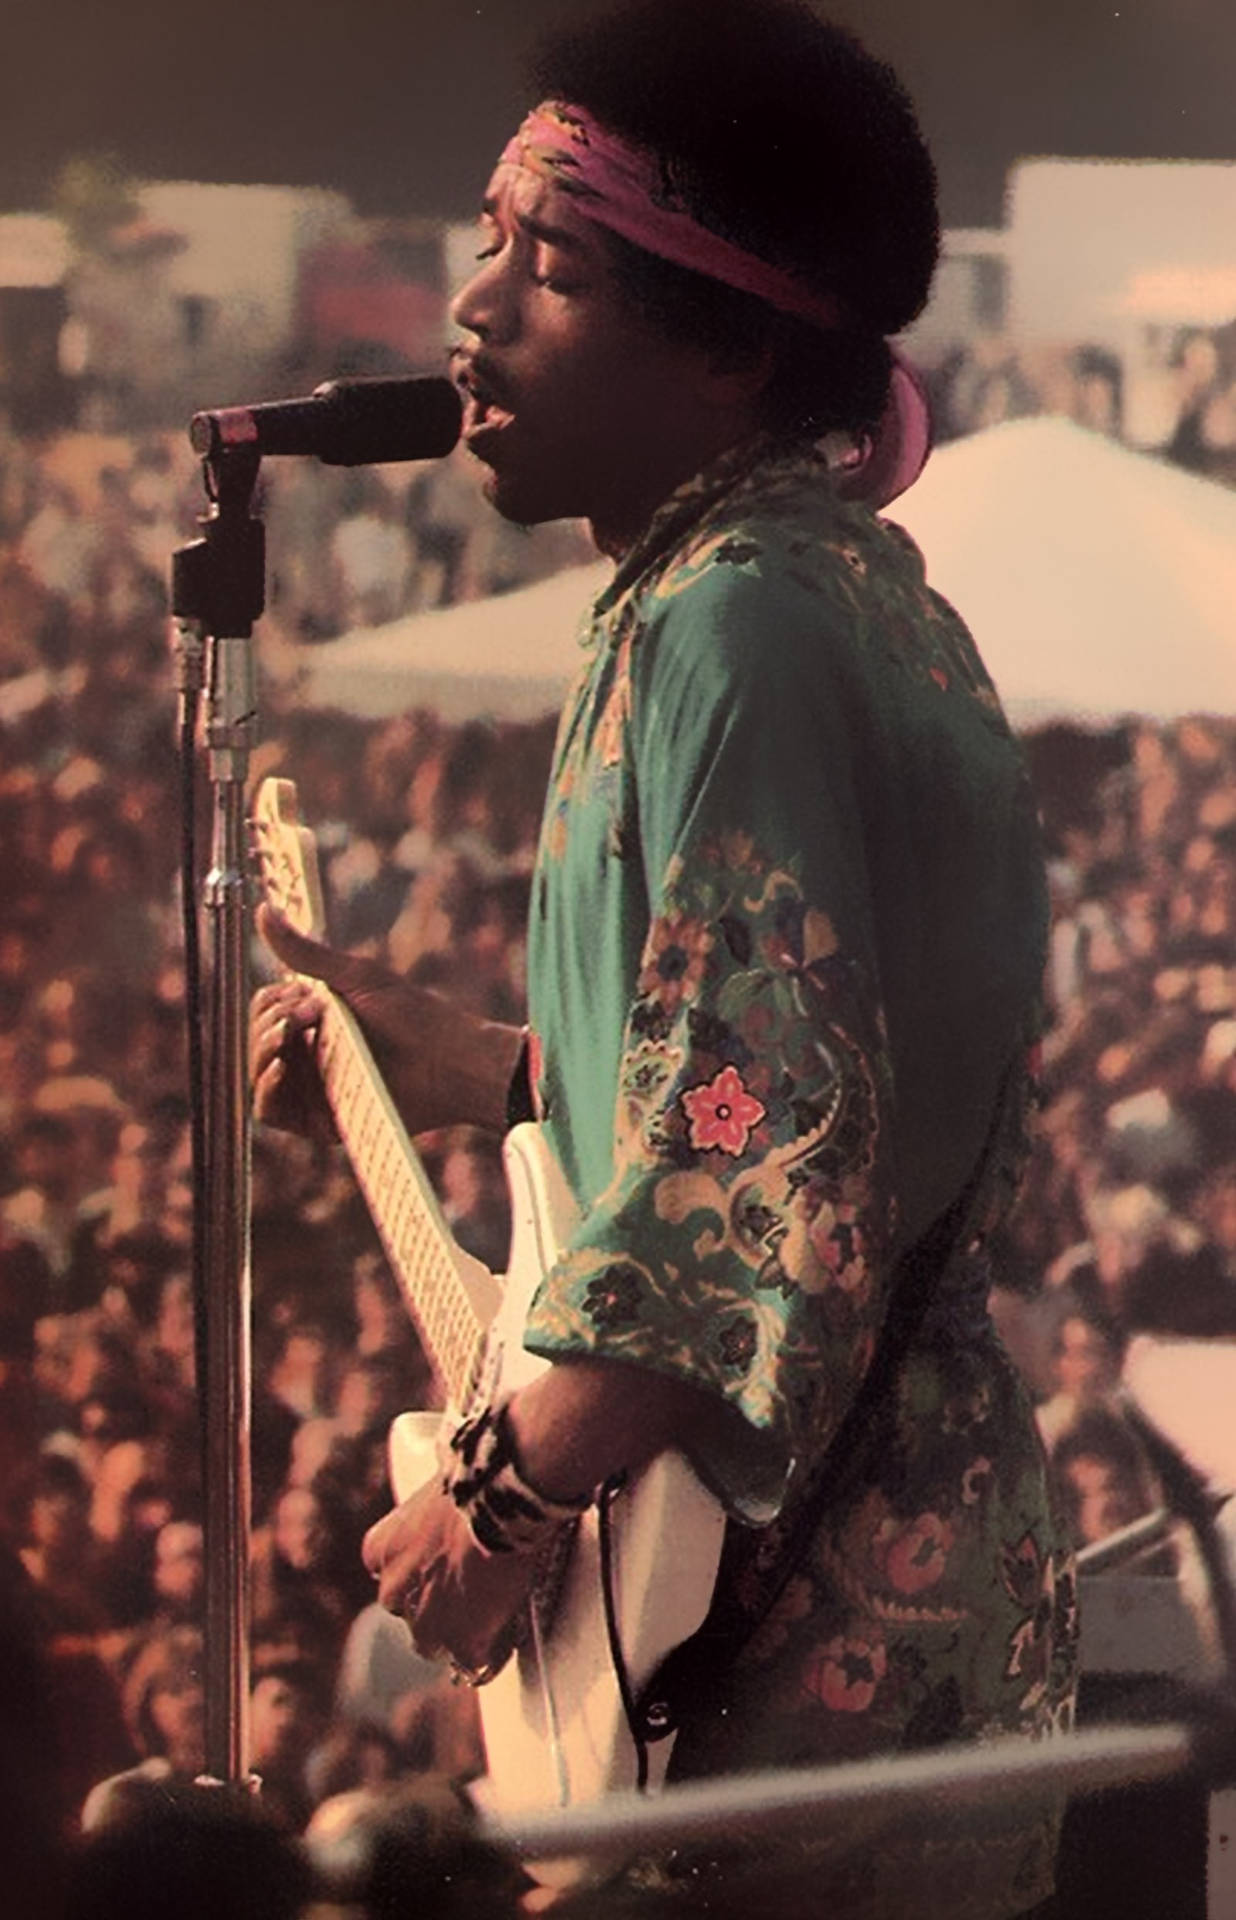 Jimi Hendrix Playing In Front Large Crowd Wallpaper